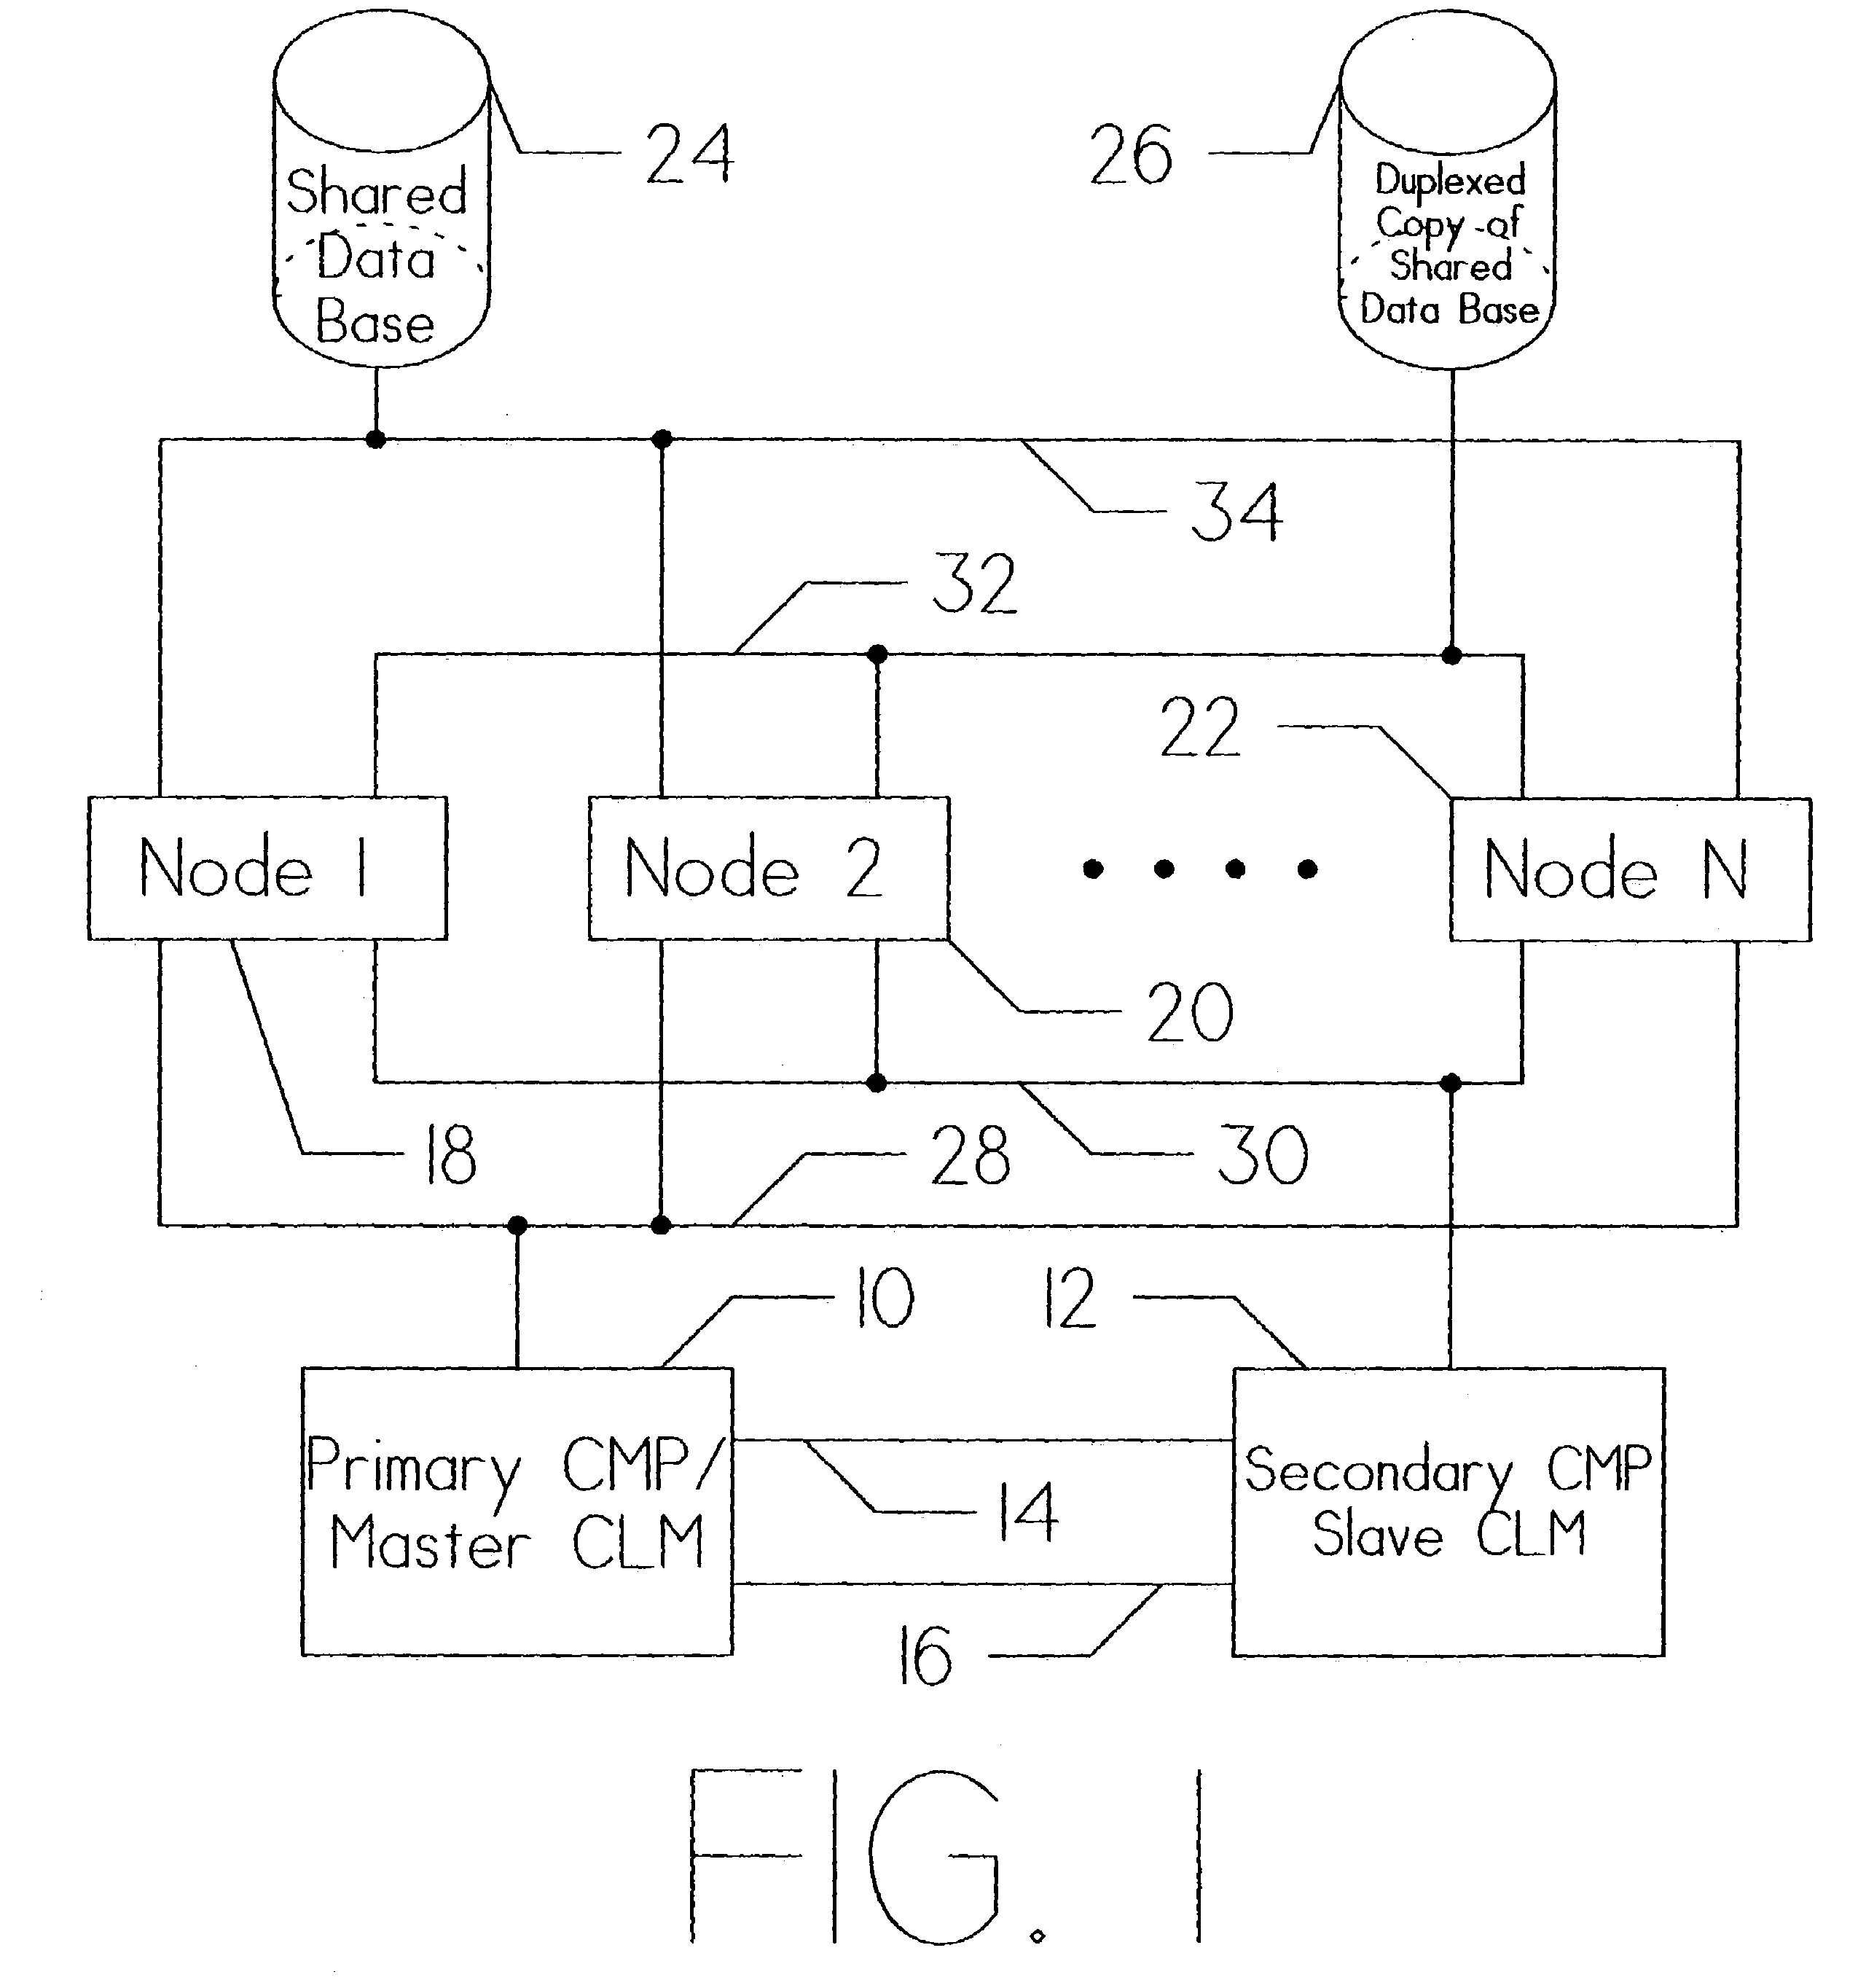 Method for obtaining higher throughput in a computer system utilizing a clustered systems manager